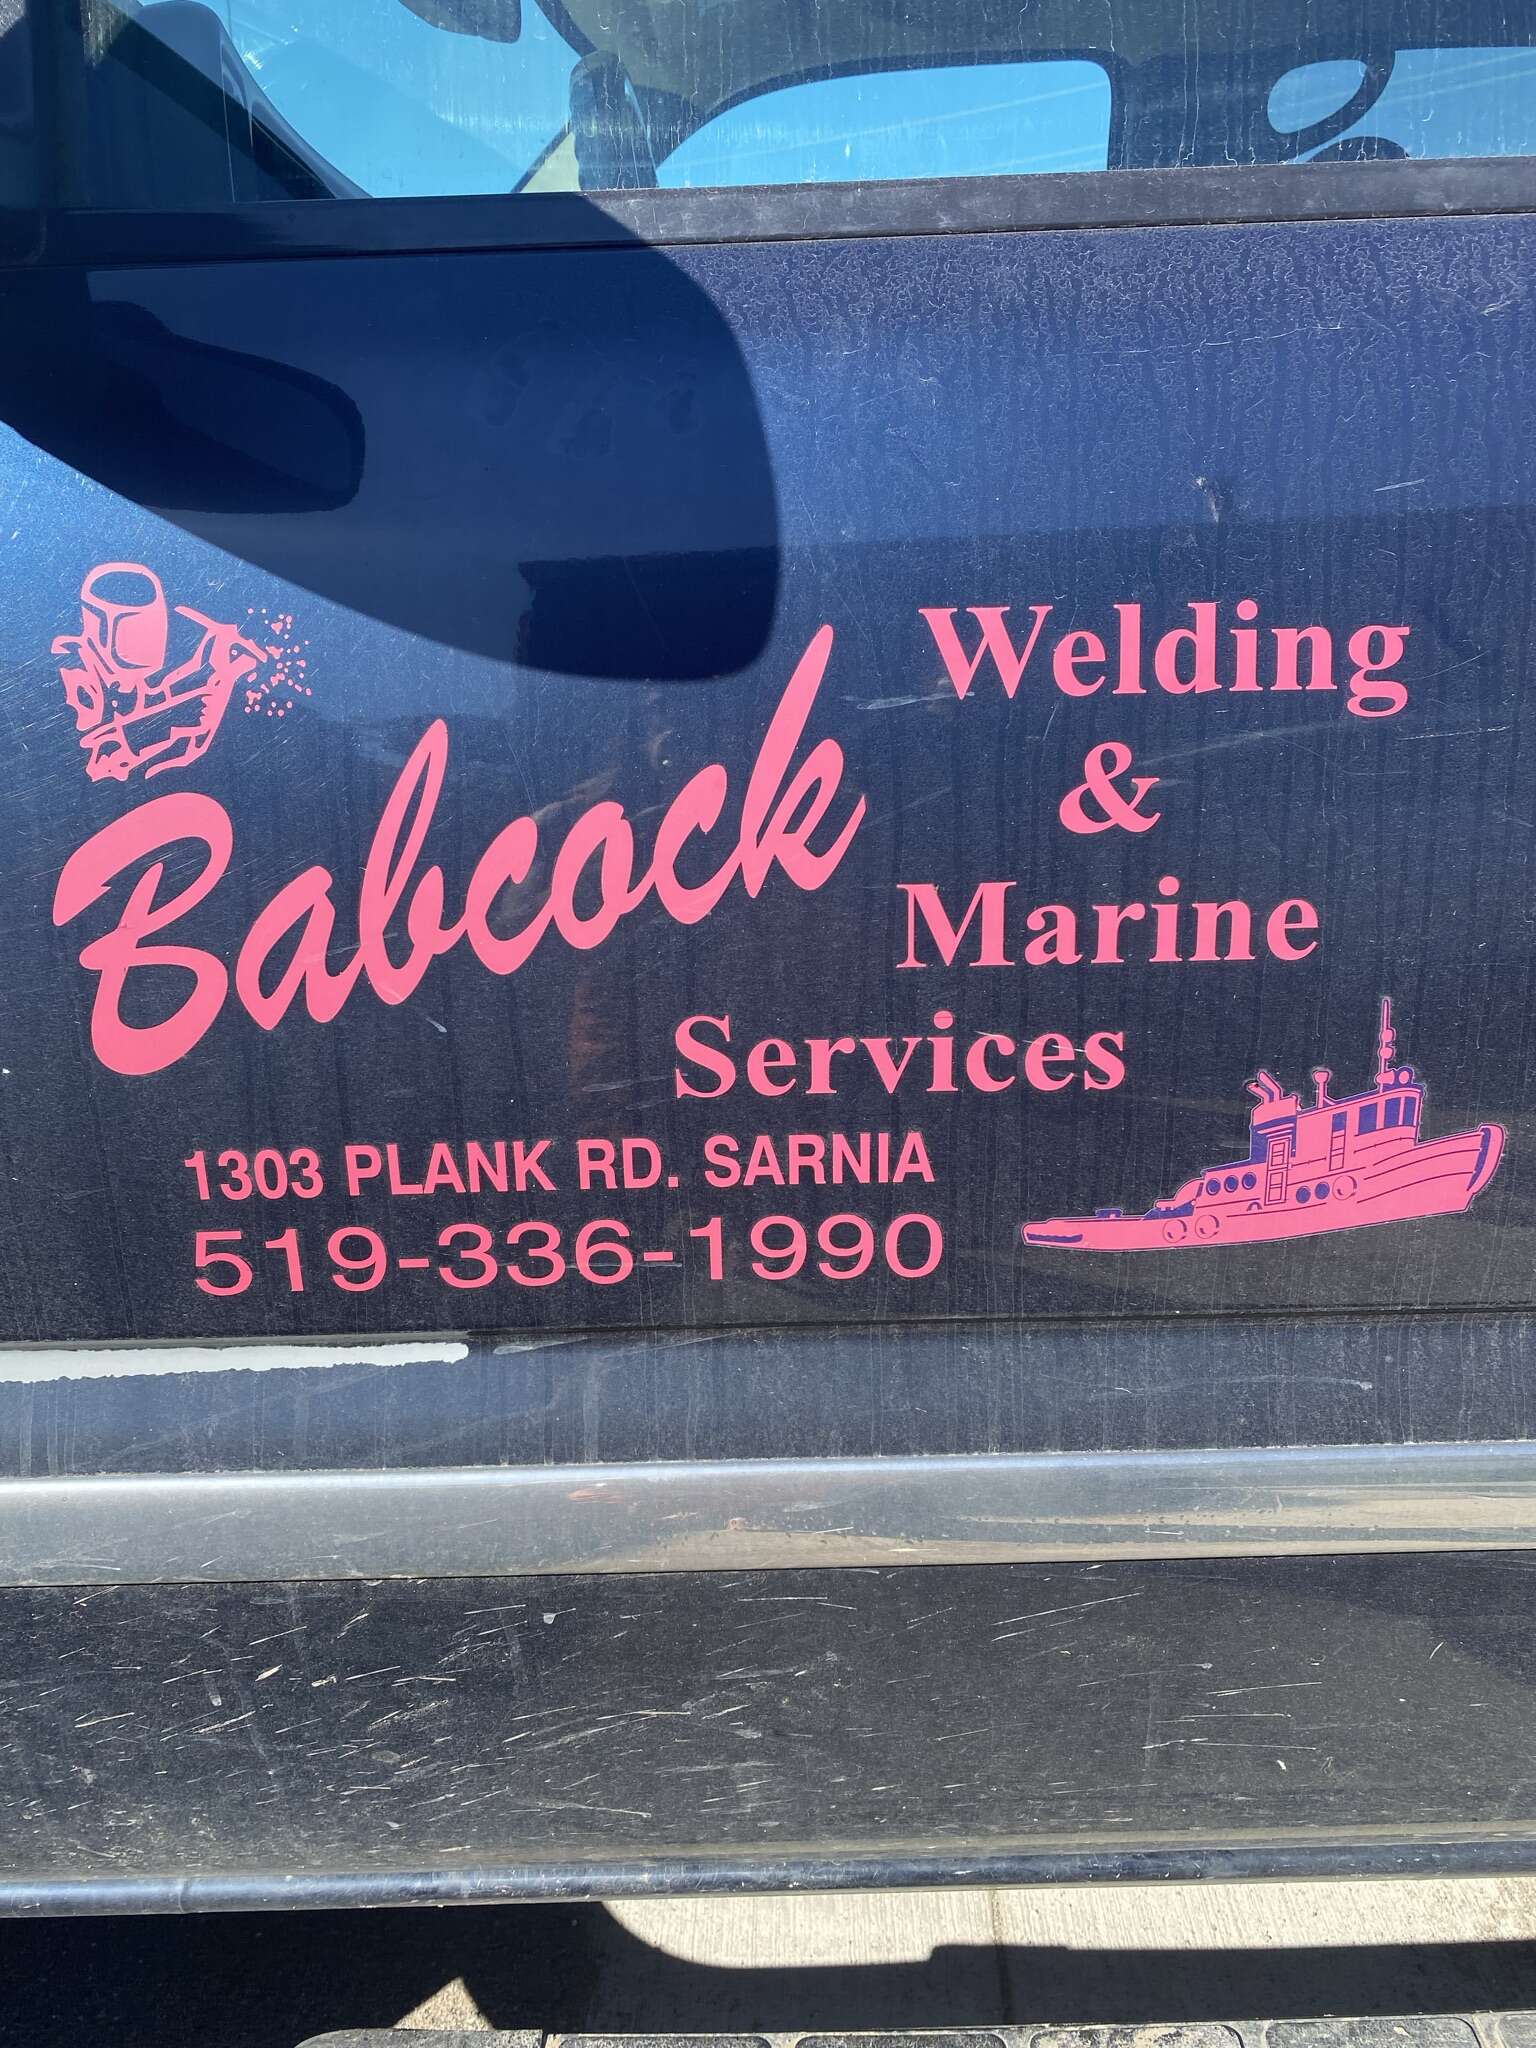 Babcock Welding and Marine Services